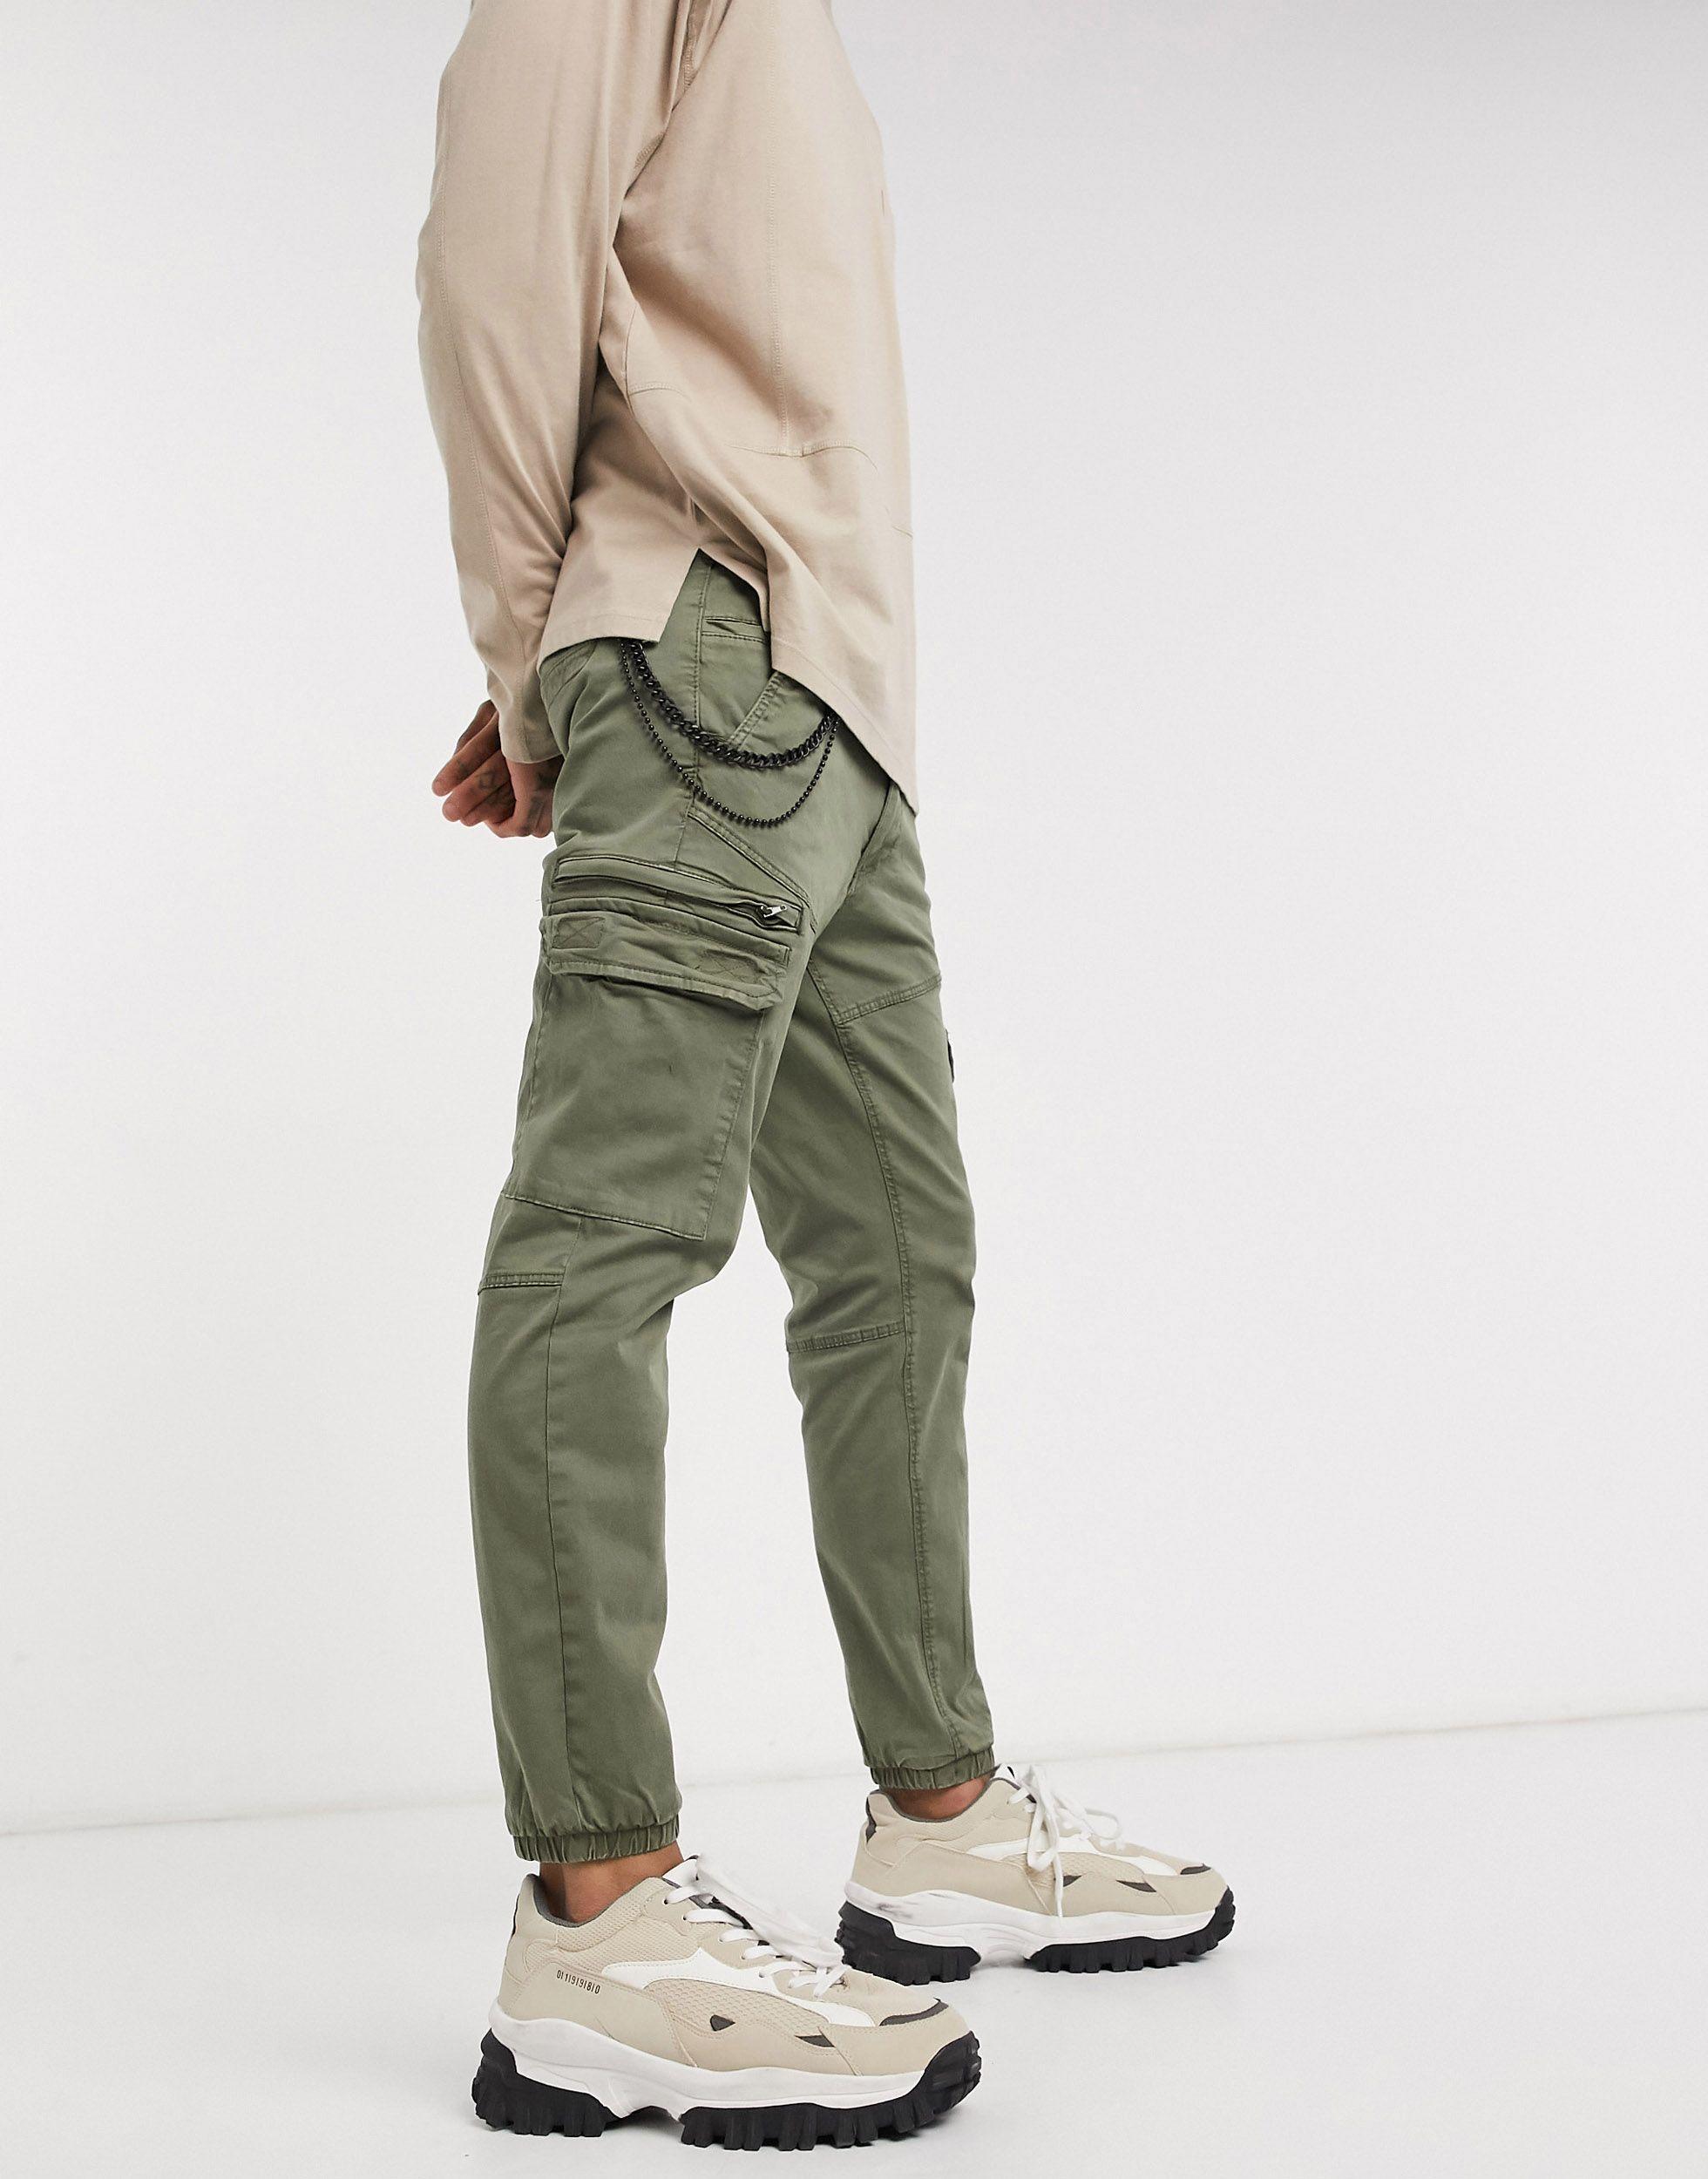 Pull&Bear Cuffed Cargo Trouser With Chain in Beige (Natural) for Men - Lyst